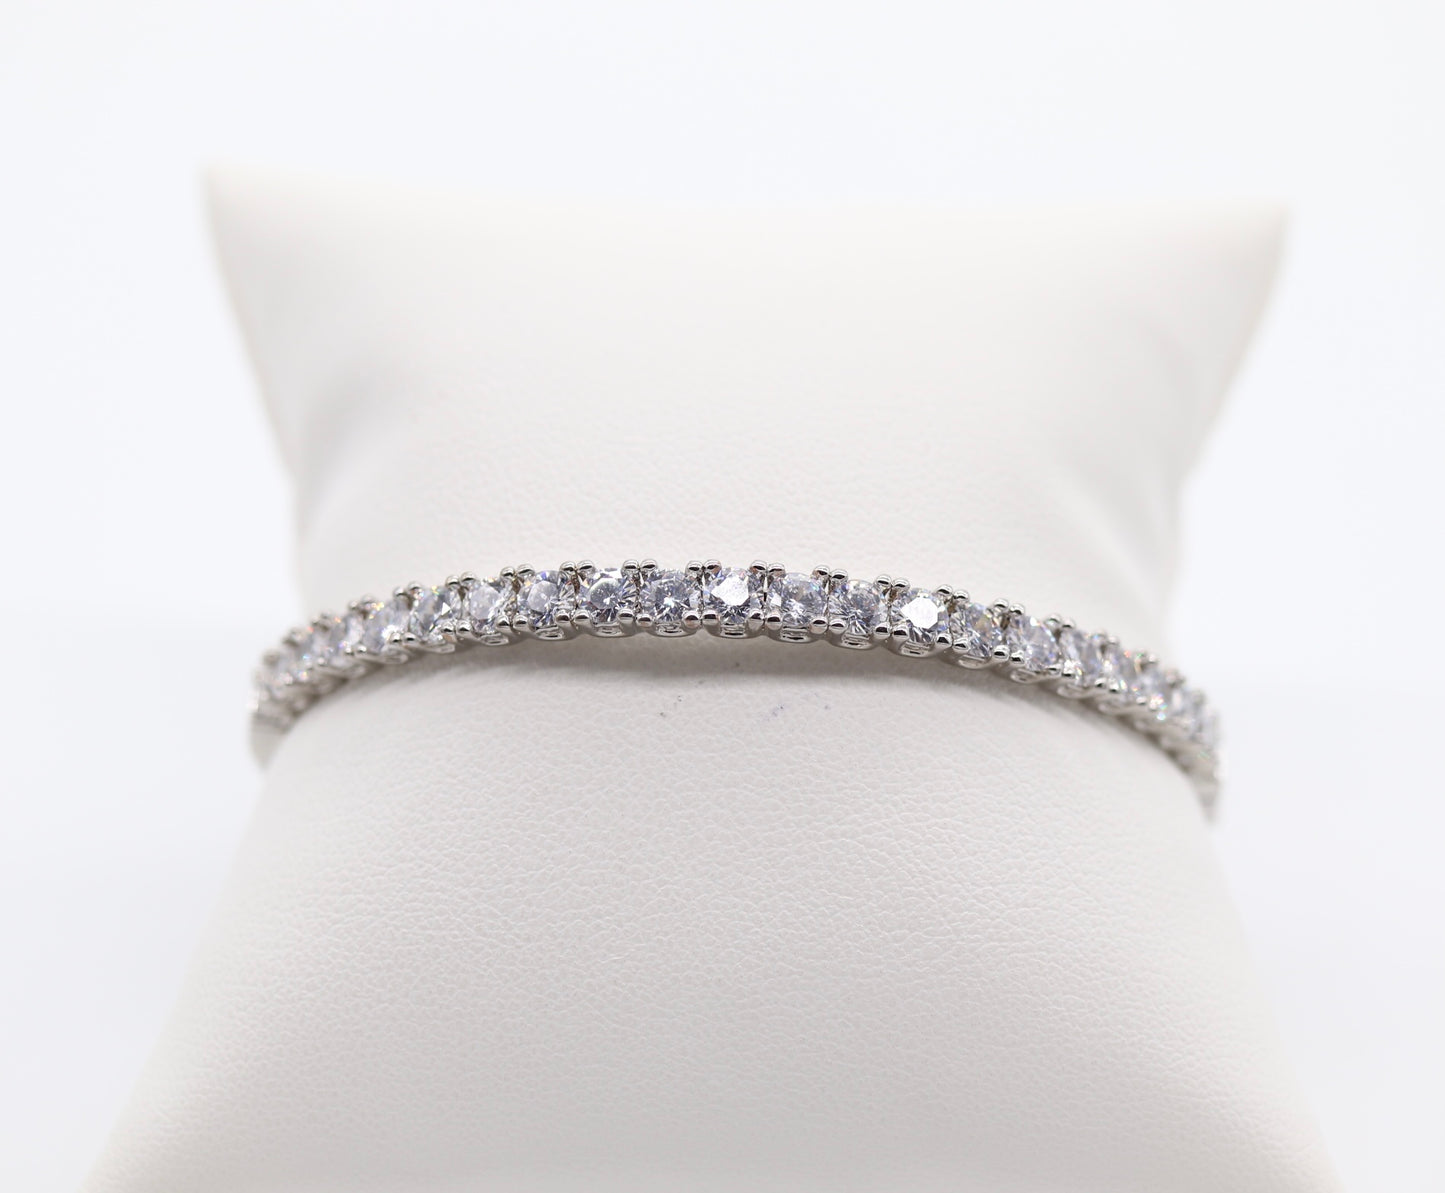 Sterling Silver Bangle with CZ Diamonds!!